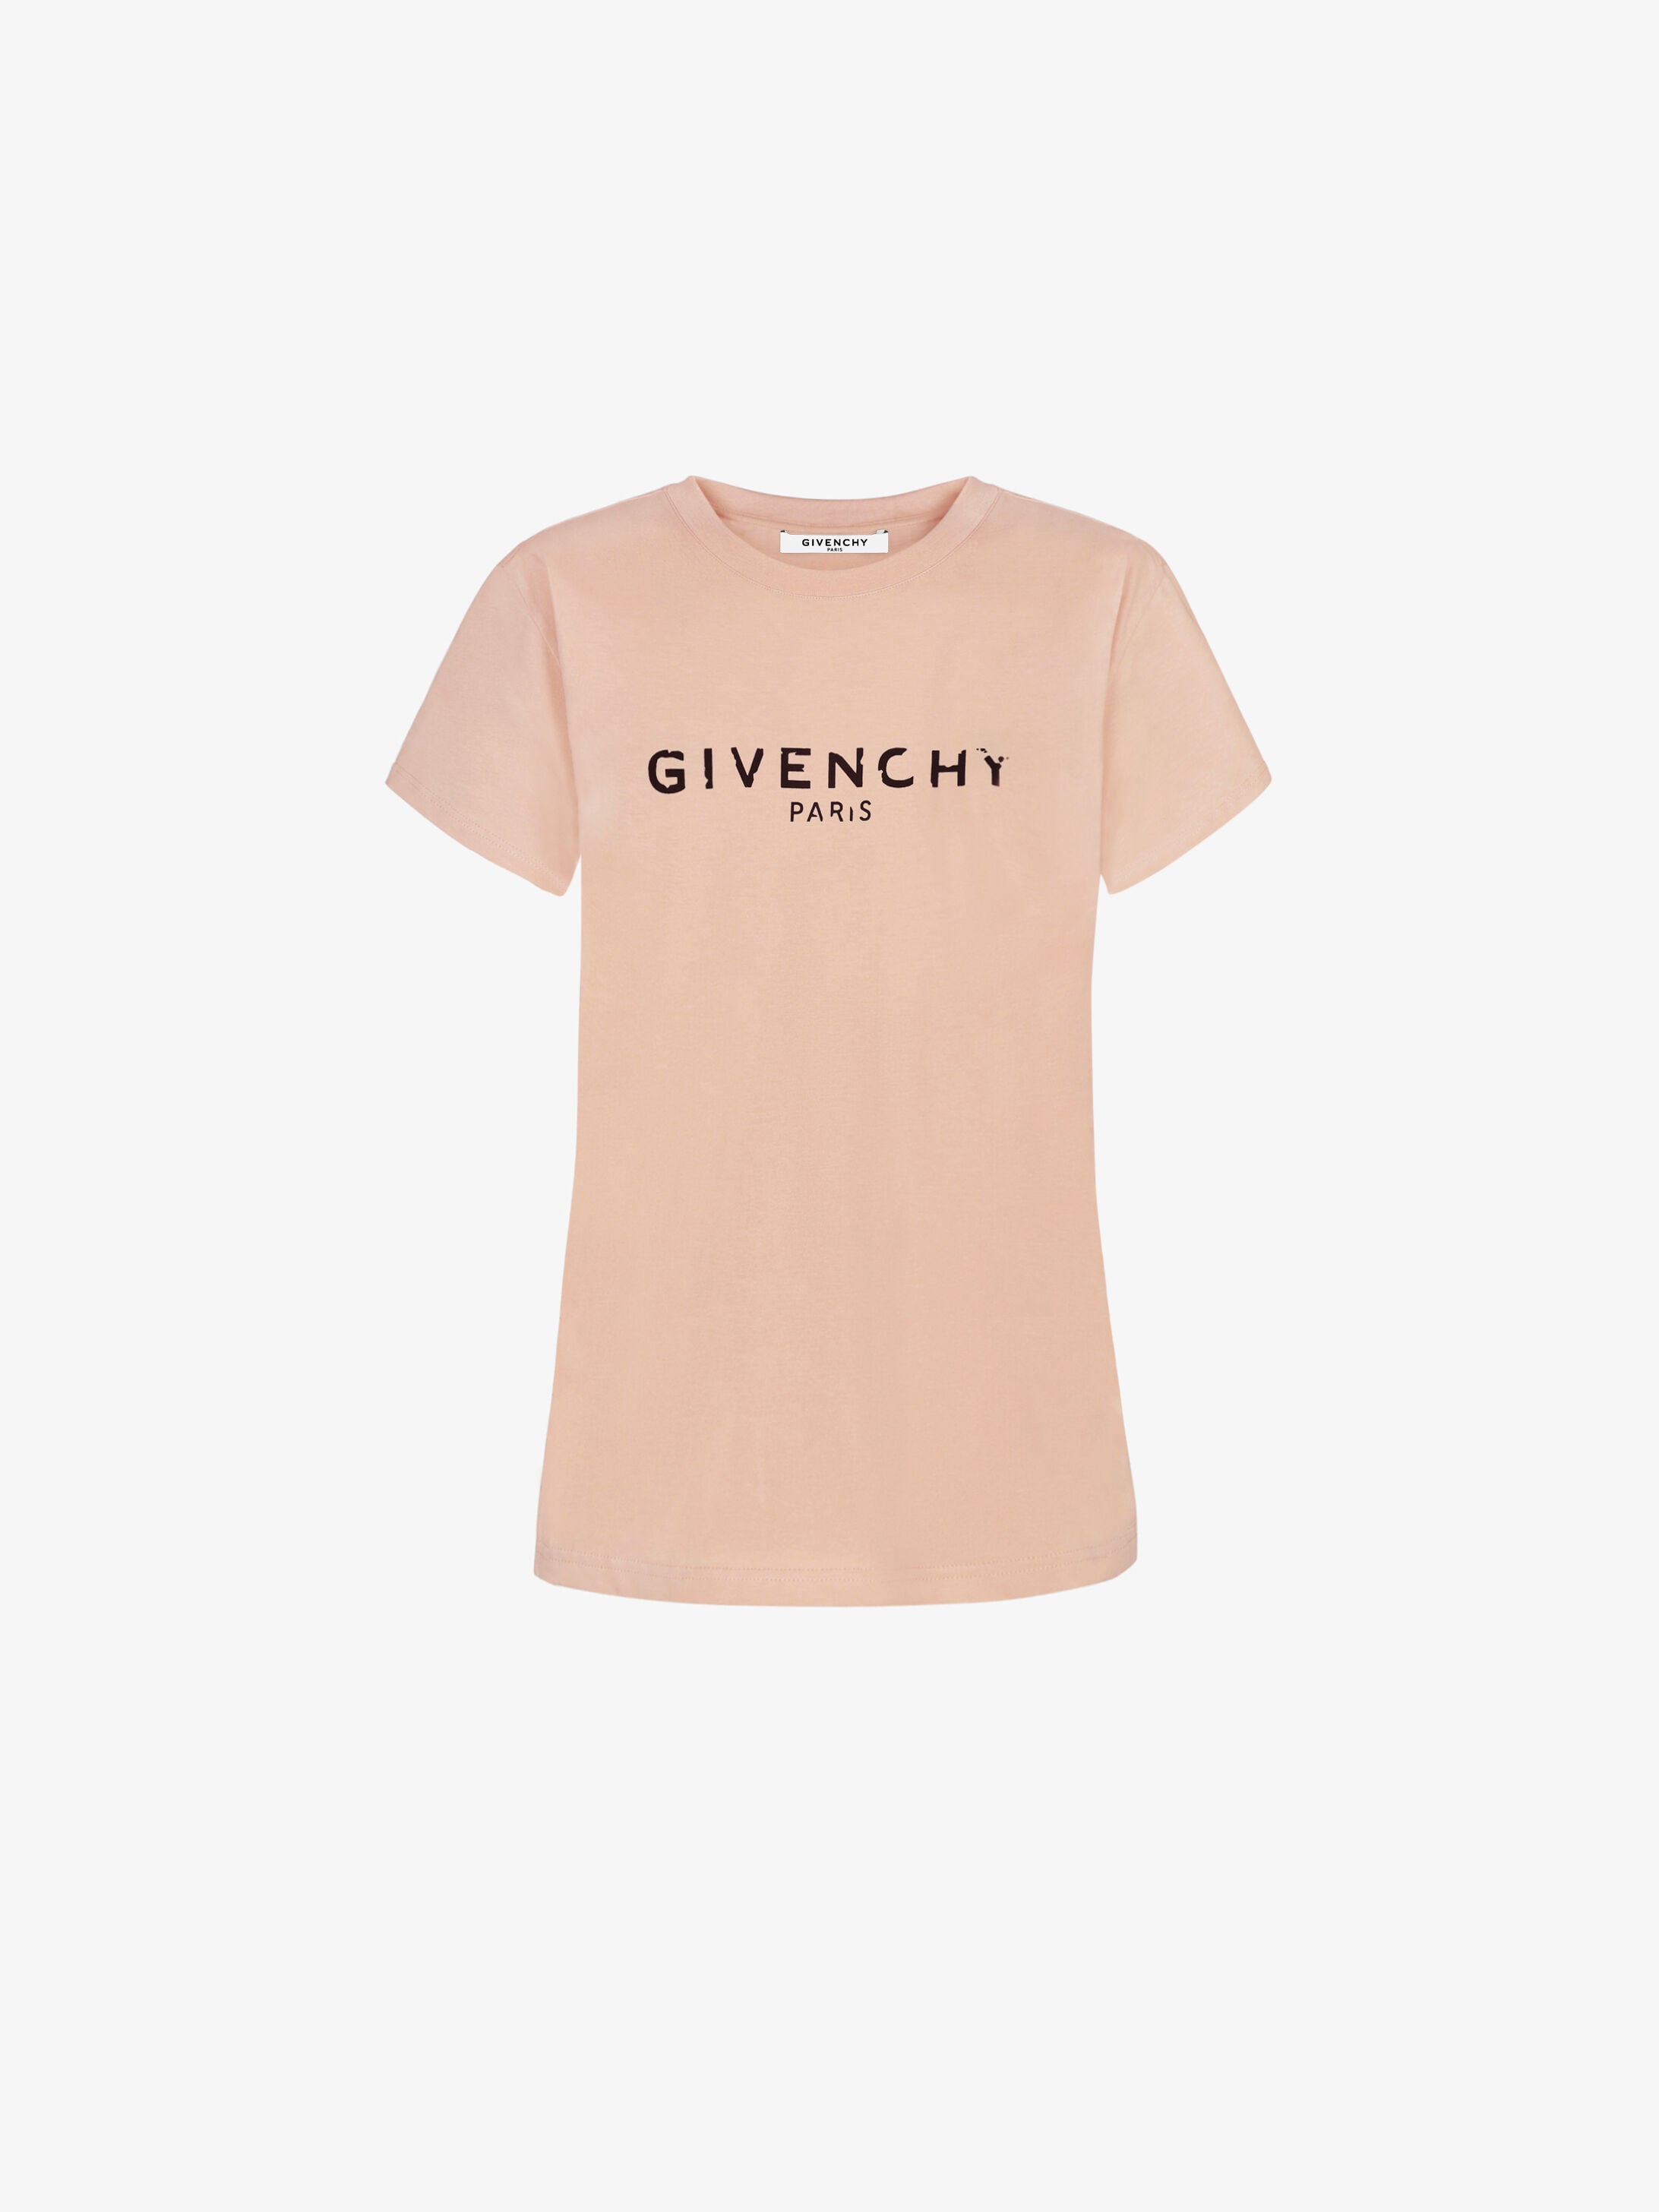 Vintage GIVENCHY PARIS fitted T-shirt 